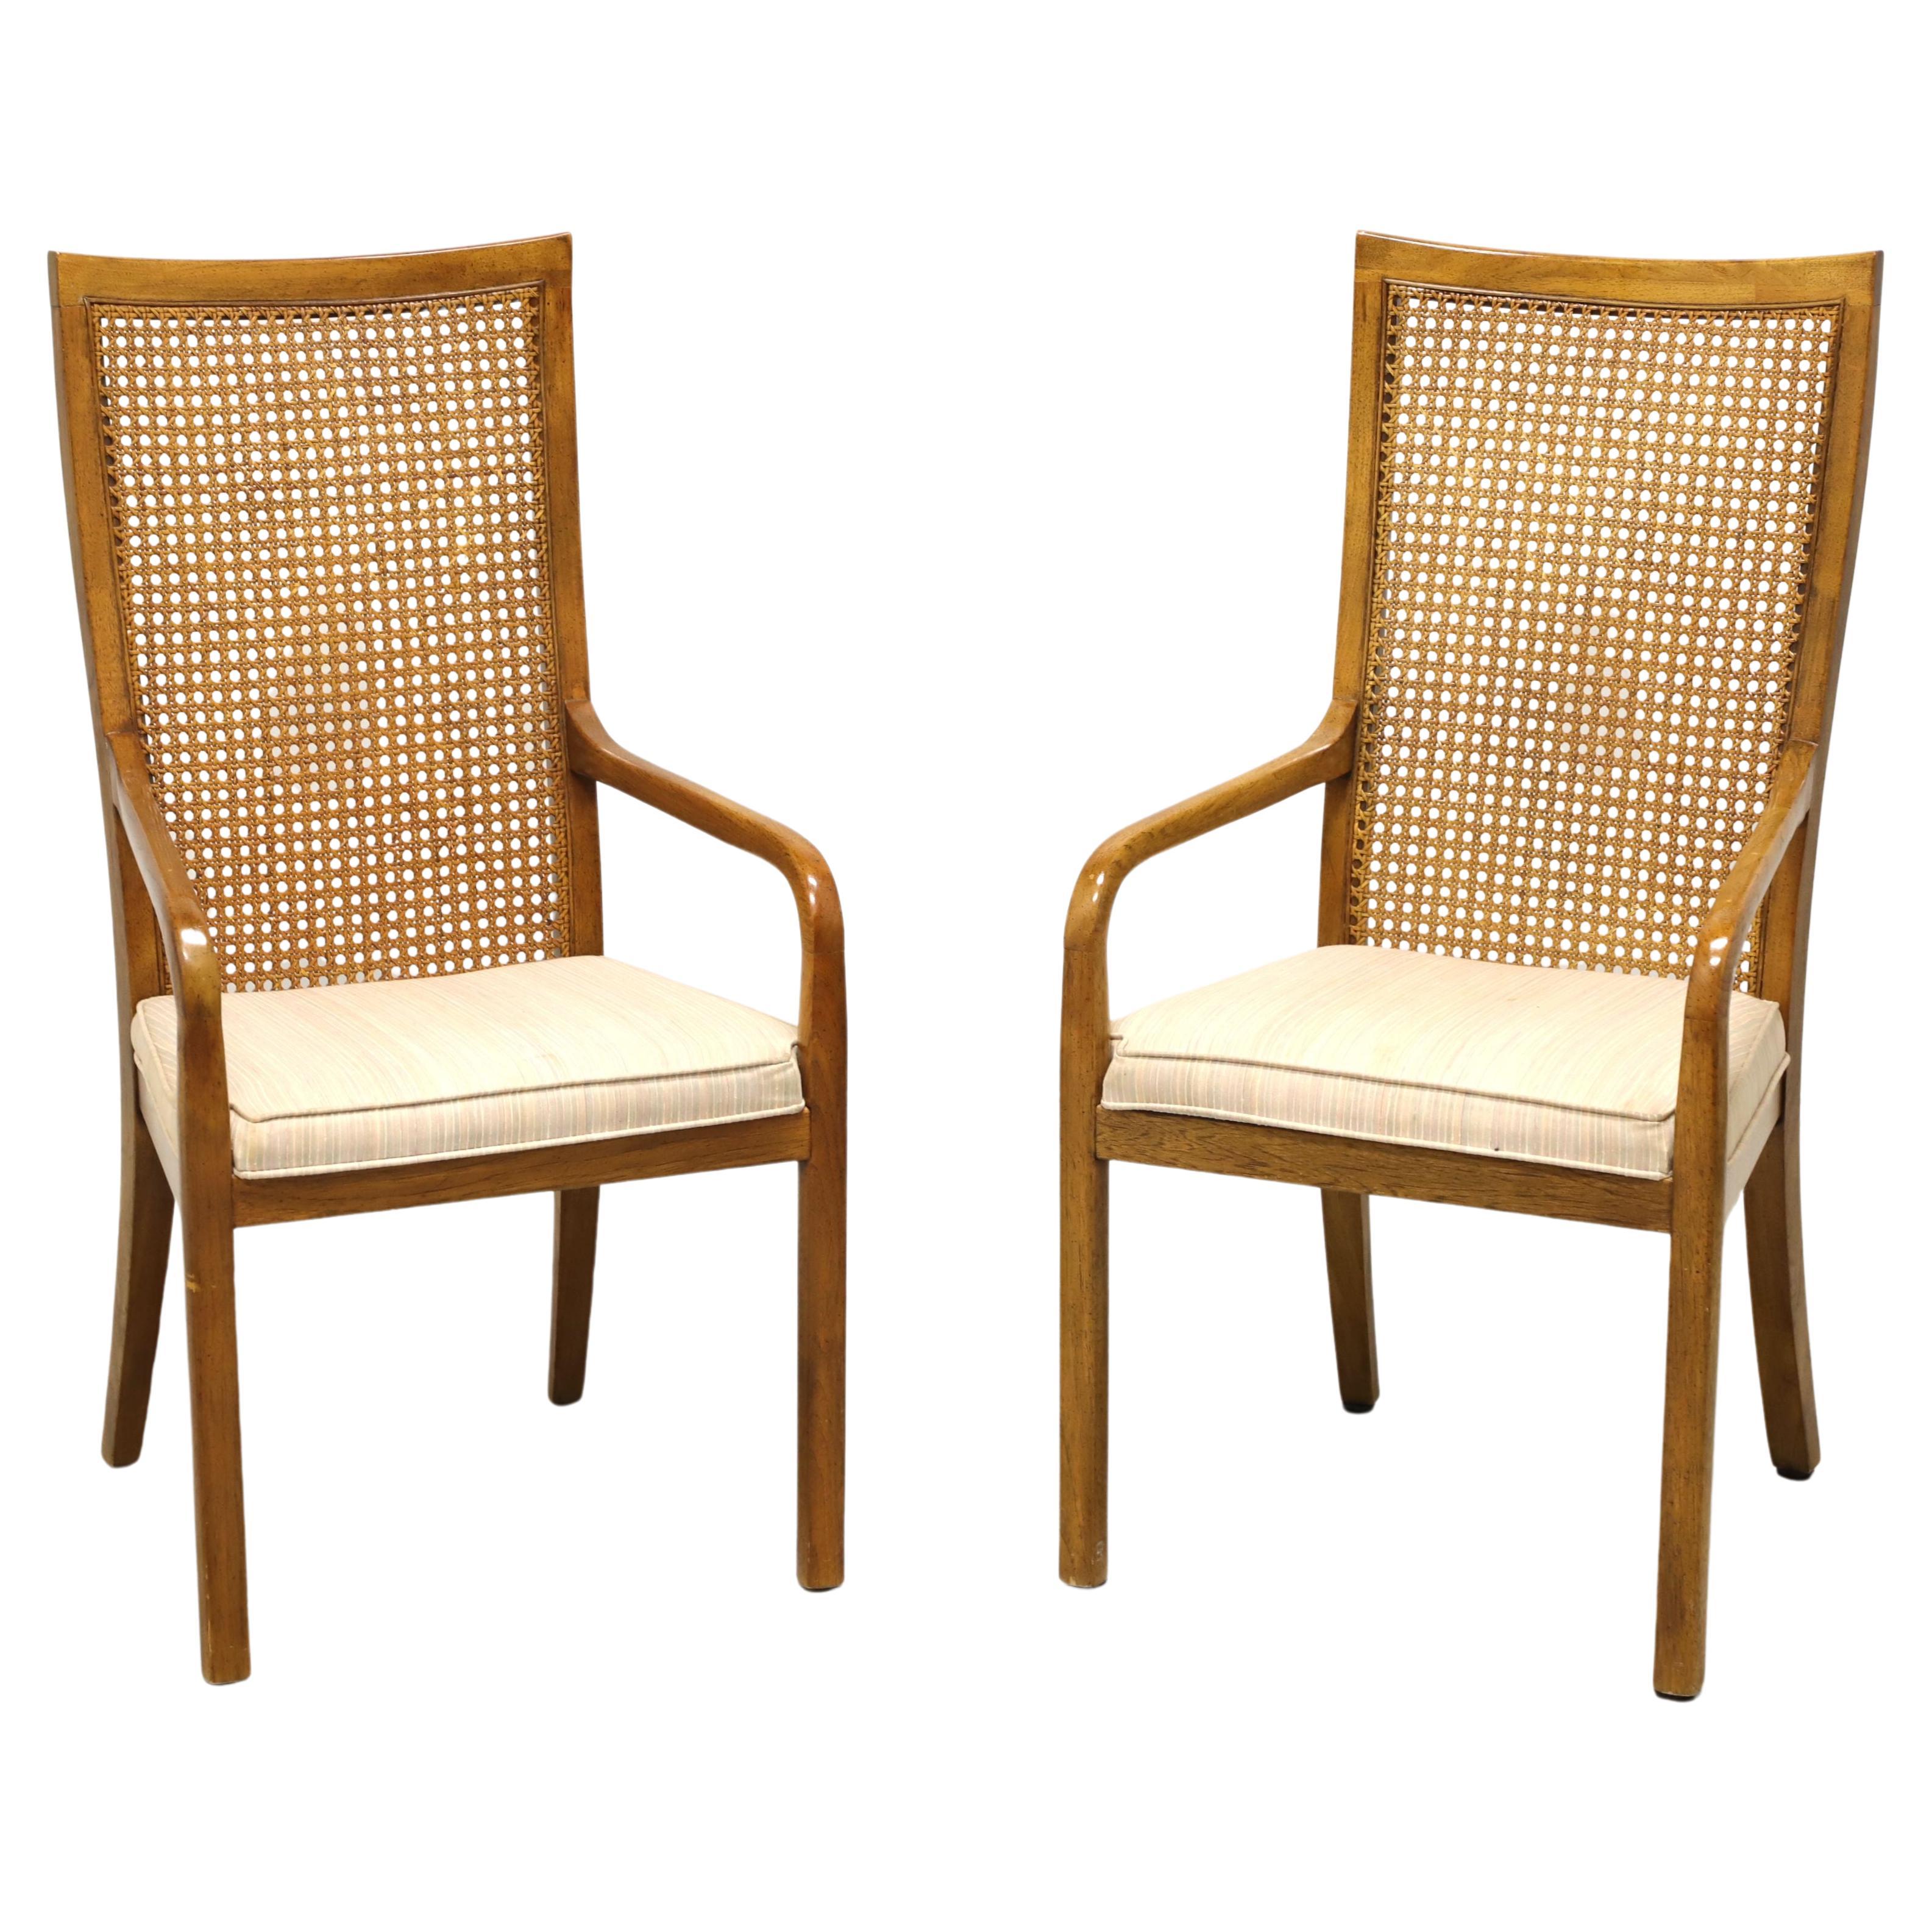 DREXEL Accolade Campaign Style Dining Armchairs - Pair